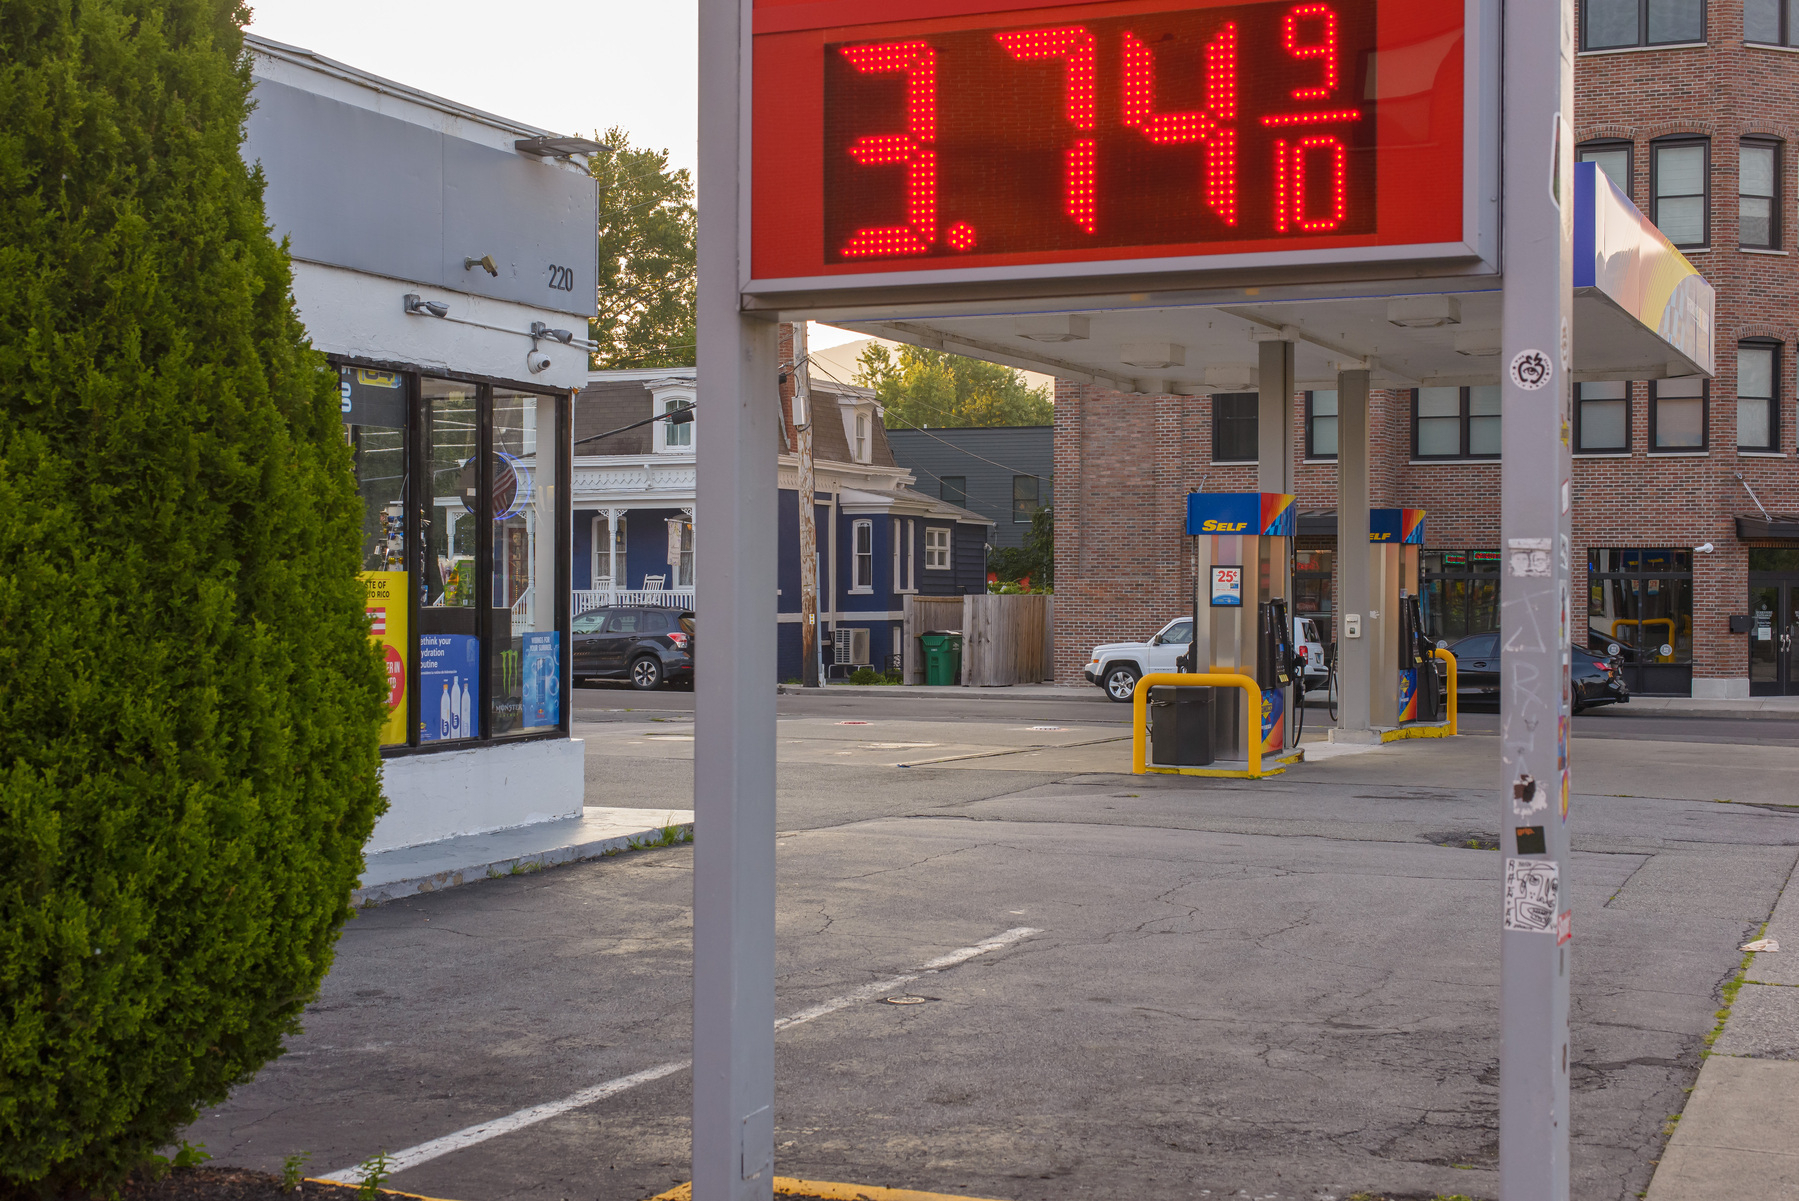 street scape, gas station, sign with gas prices in the middle foreground, evergreen shrub in the foreground on left side of frame, gas pumps in the background between the supports of the pricing sign, edge of convenience store in the background between the evergreen and left support of the pricing sign